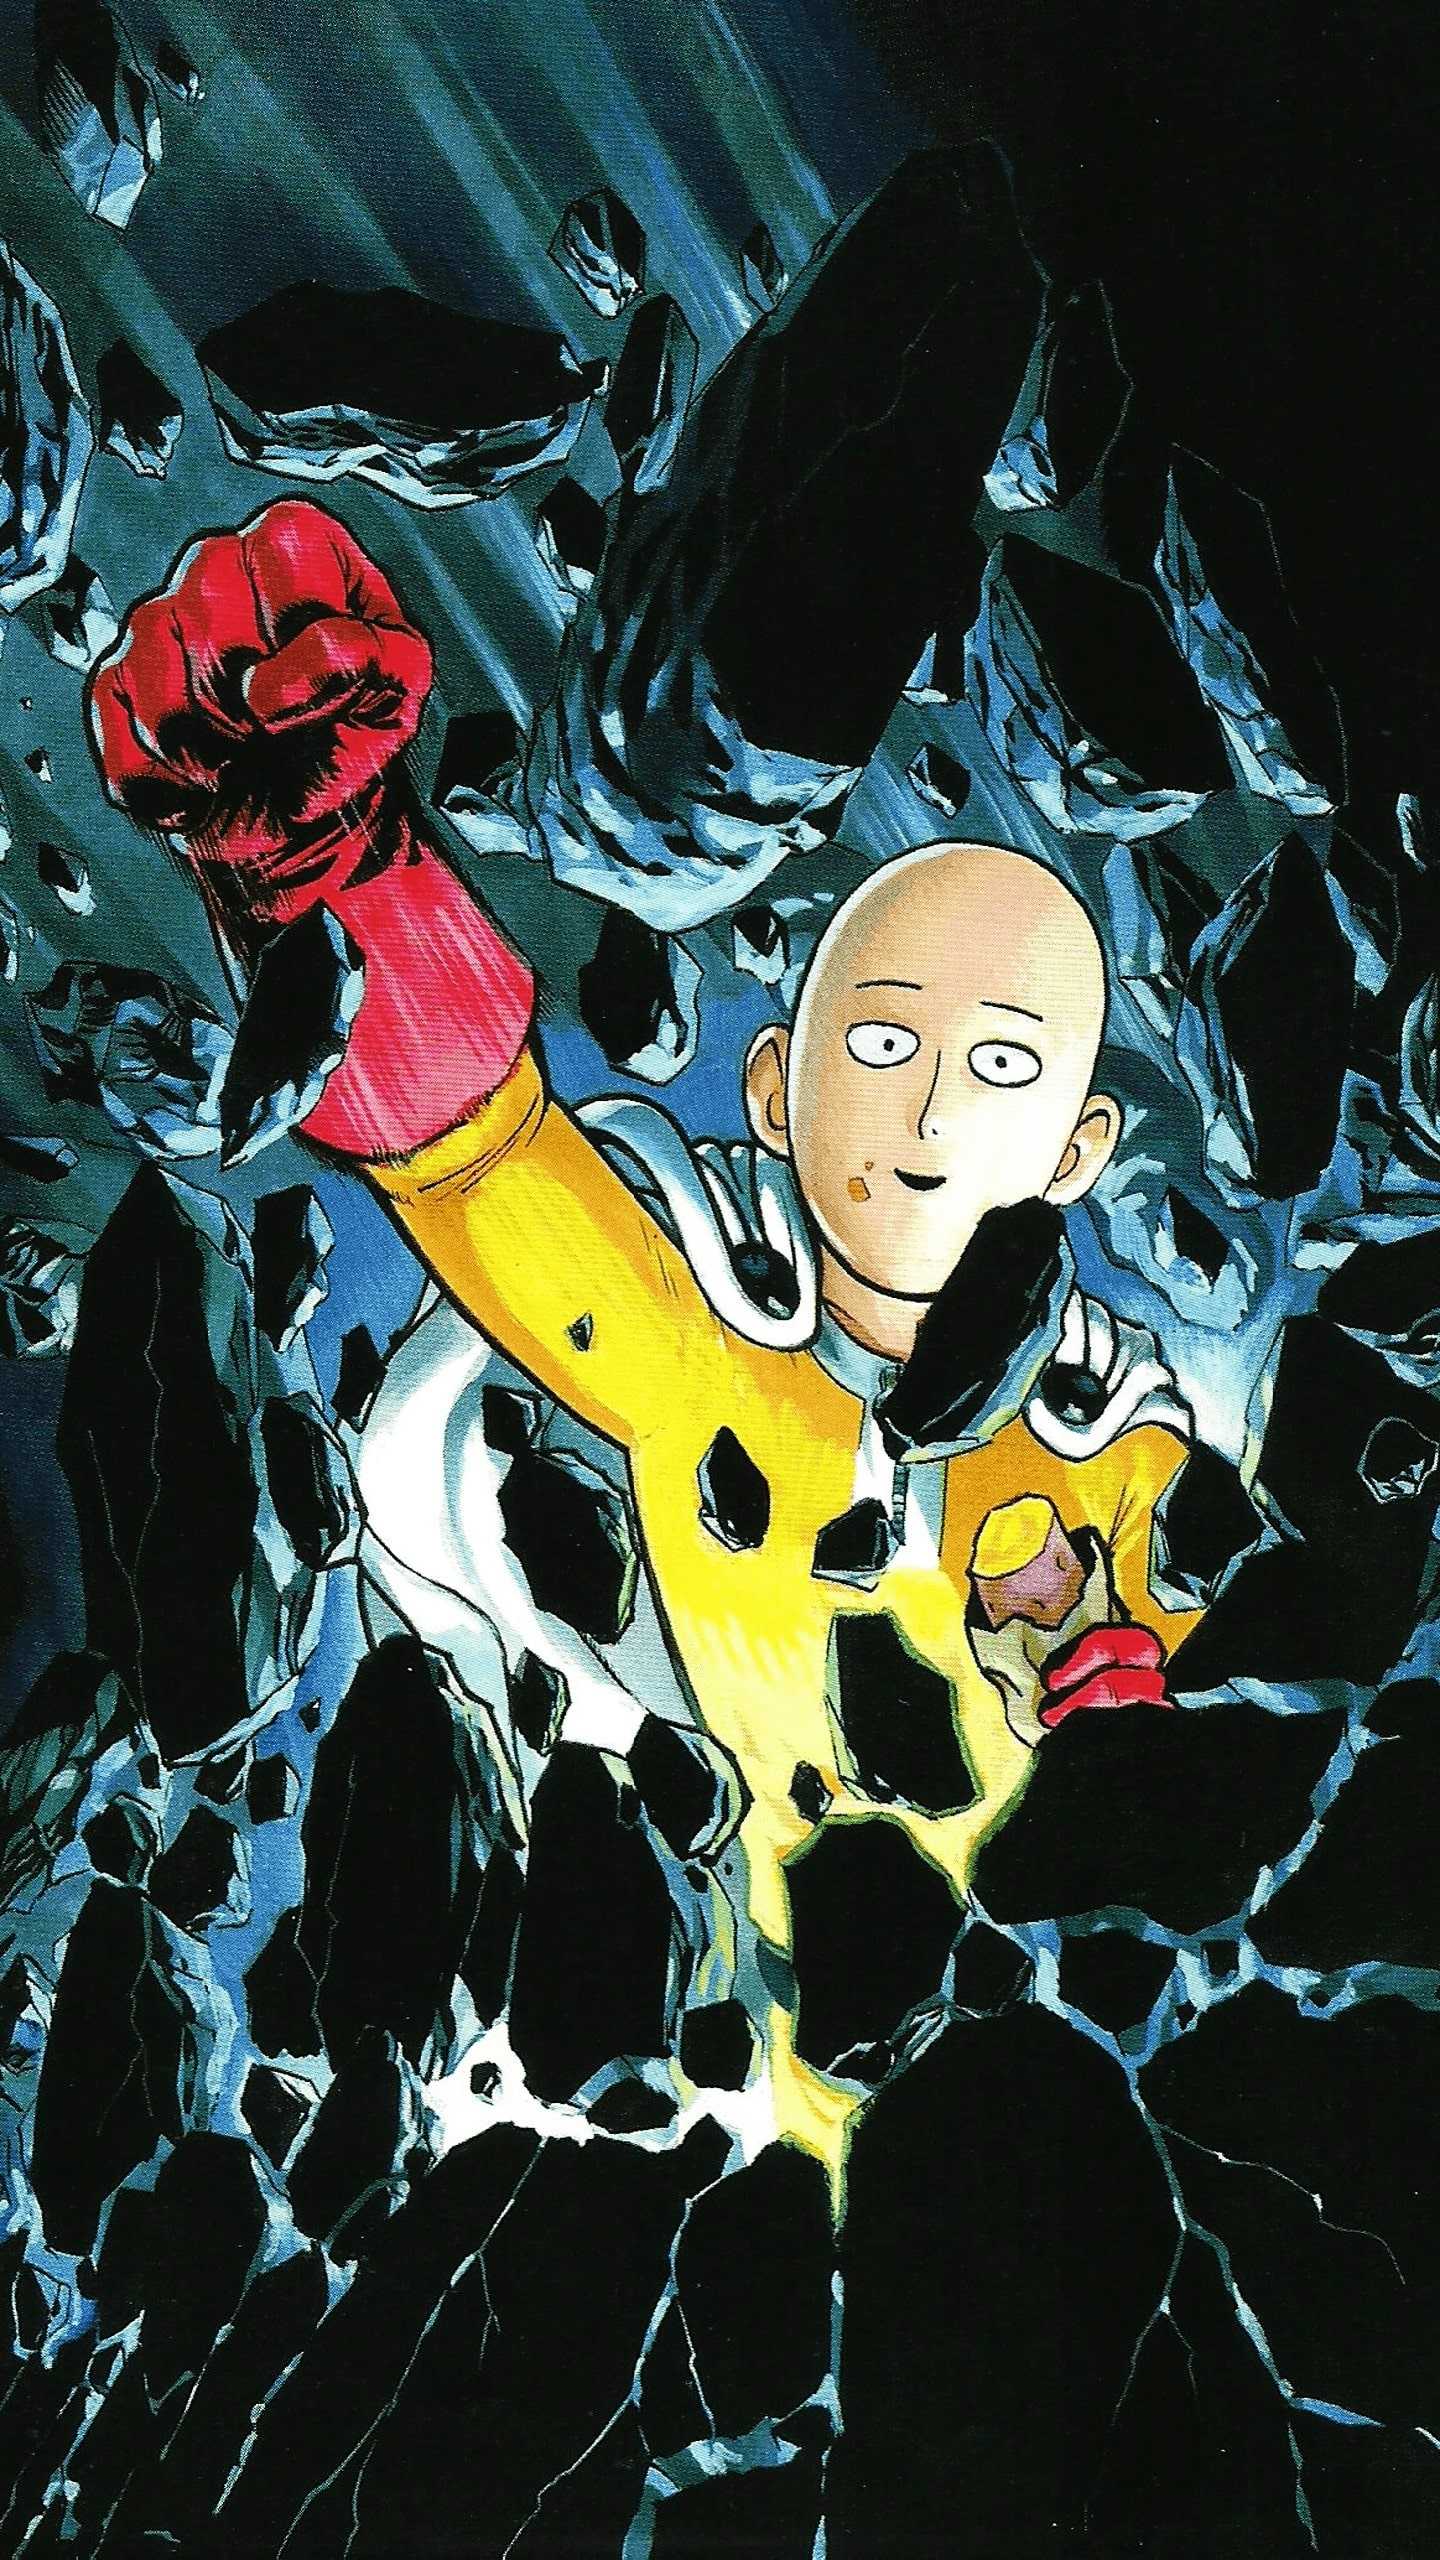 1080x1920 Saitama One Punch Man 4k Iphone 7,6s,6 Plus, Pixel xl ,One Plus  3,3t,5 ,HD 4k Wallpapers,Images,Backgrounds,Photos and Pictures